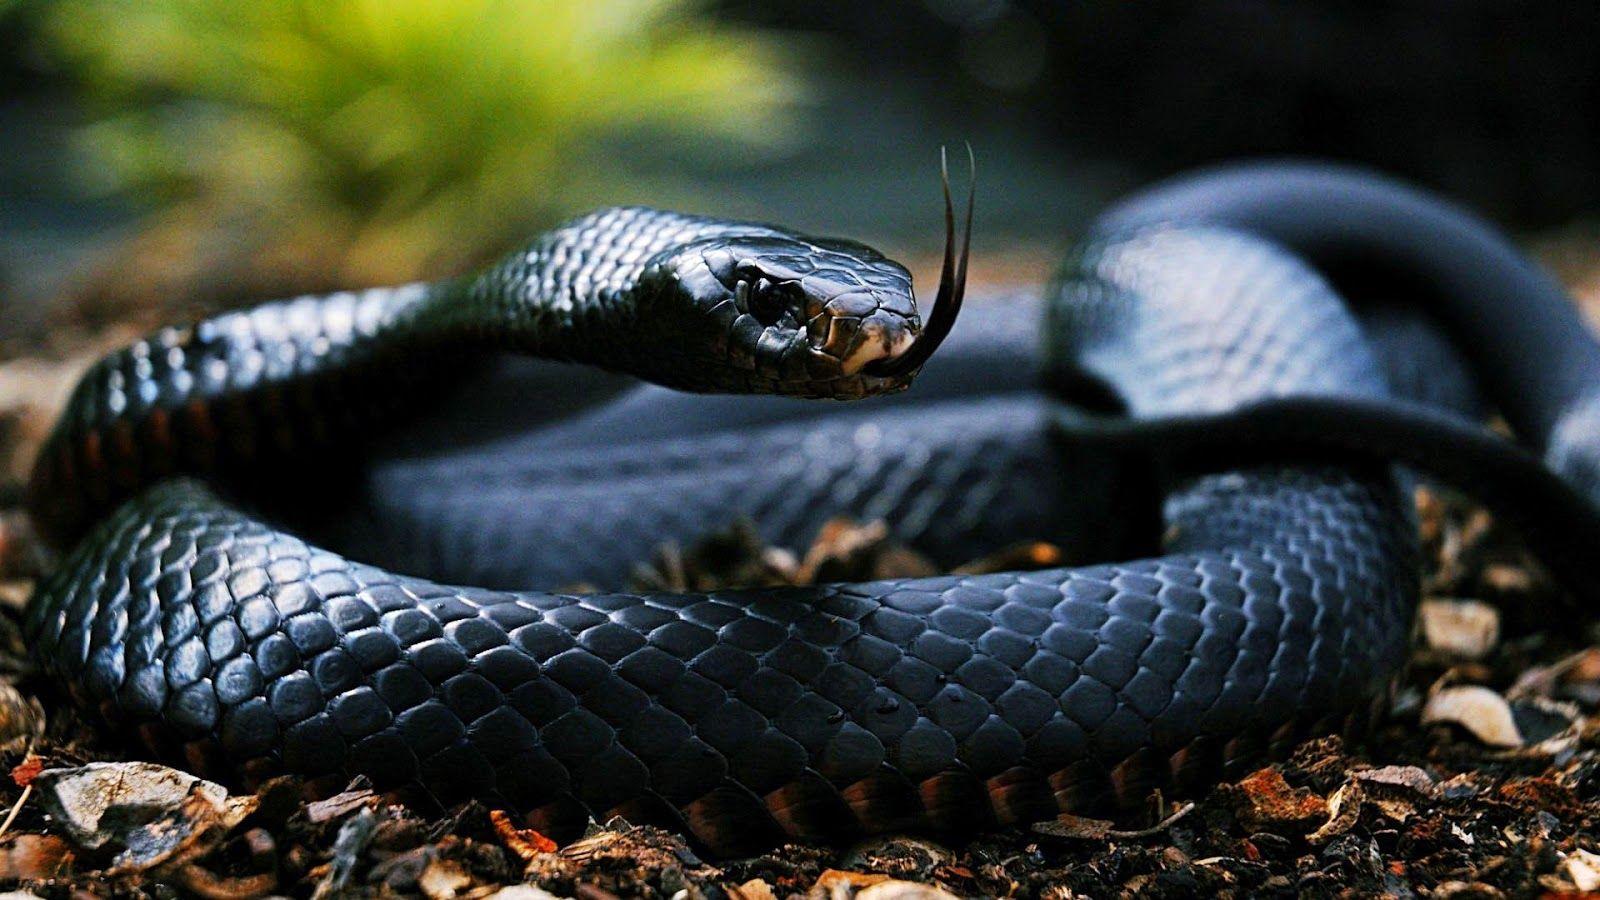 most dangerous snakes which are named as death